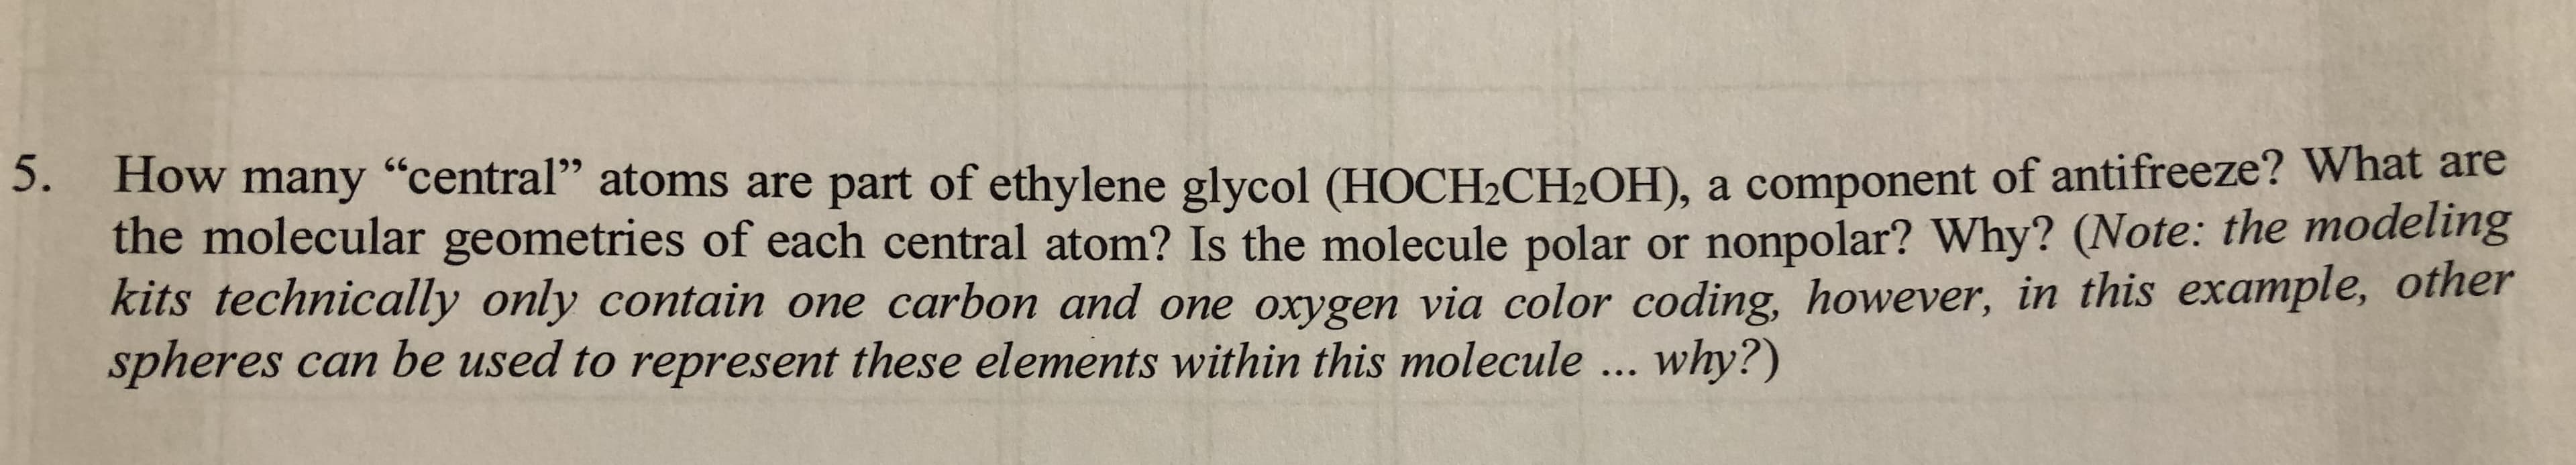 5. How many "central" atoms are part of ethylene glycol (HOCH2CH2OH), a component of antifreeze? What are
the molecular geometries of each central atom? Is the molecule polar or nonpolar? Why? (Note: the modeling
kits technically only contain one carbon and one oxygen via color coding, however, in this example, oiner
spheres can be used to represent these elements within this molecule... why?)
